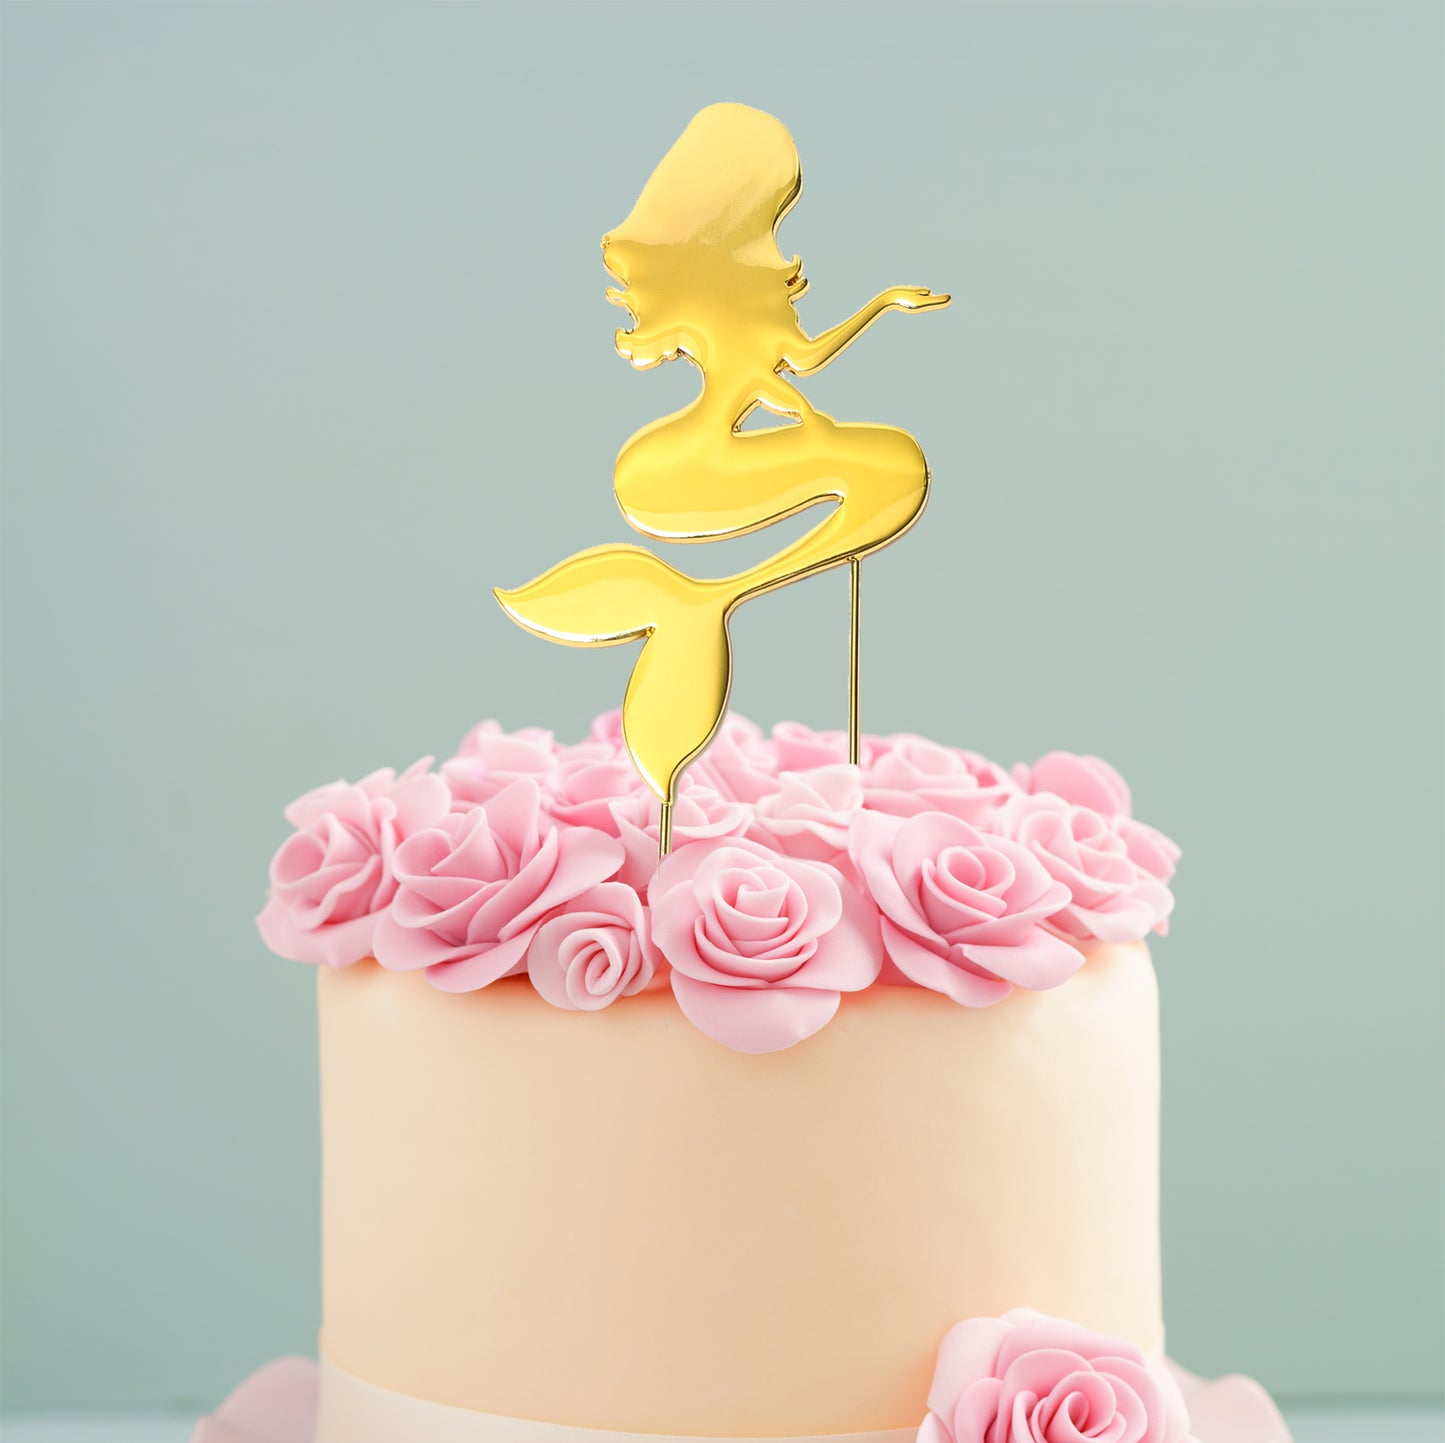 GOLD PLATED CAKE TOPPER - MERMAID GOLD TOPPER